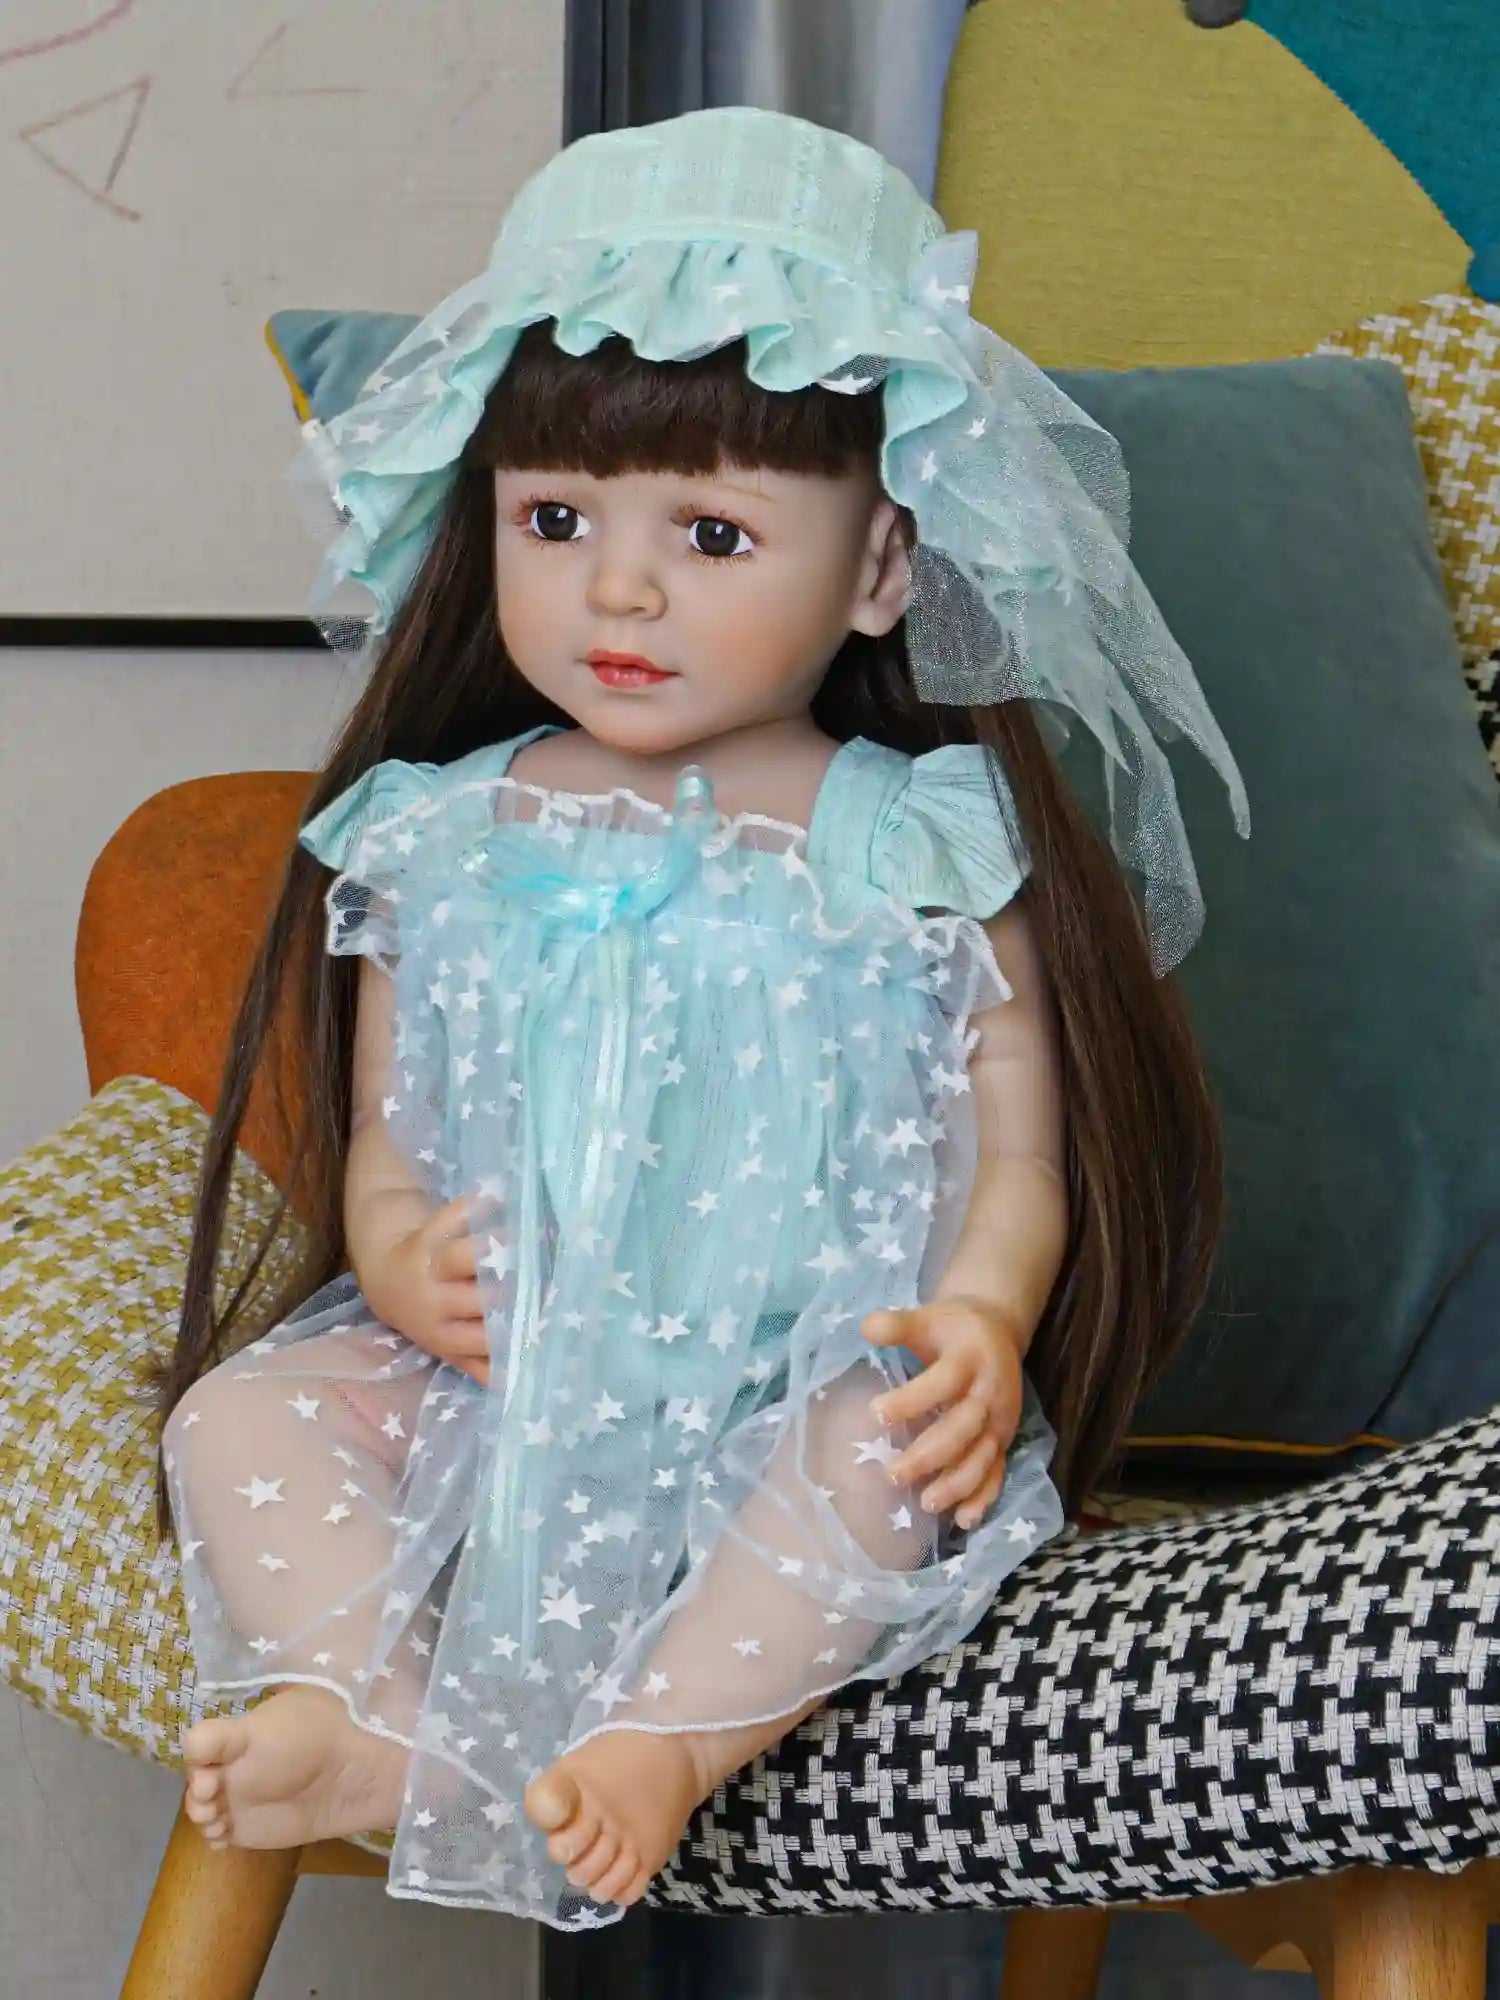 Serene doll in an aqua ensemble with a lacy hat, surrounded by colorful cushions.